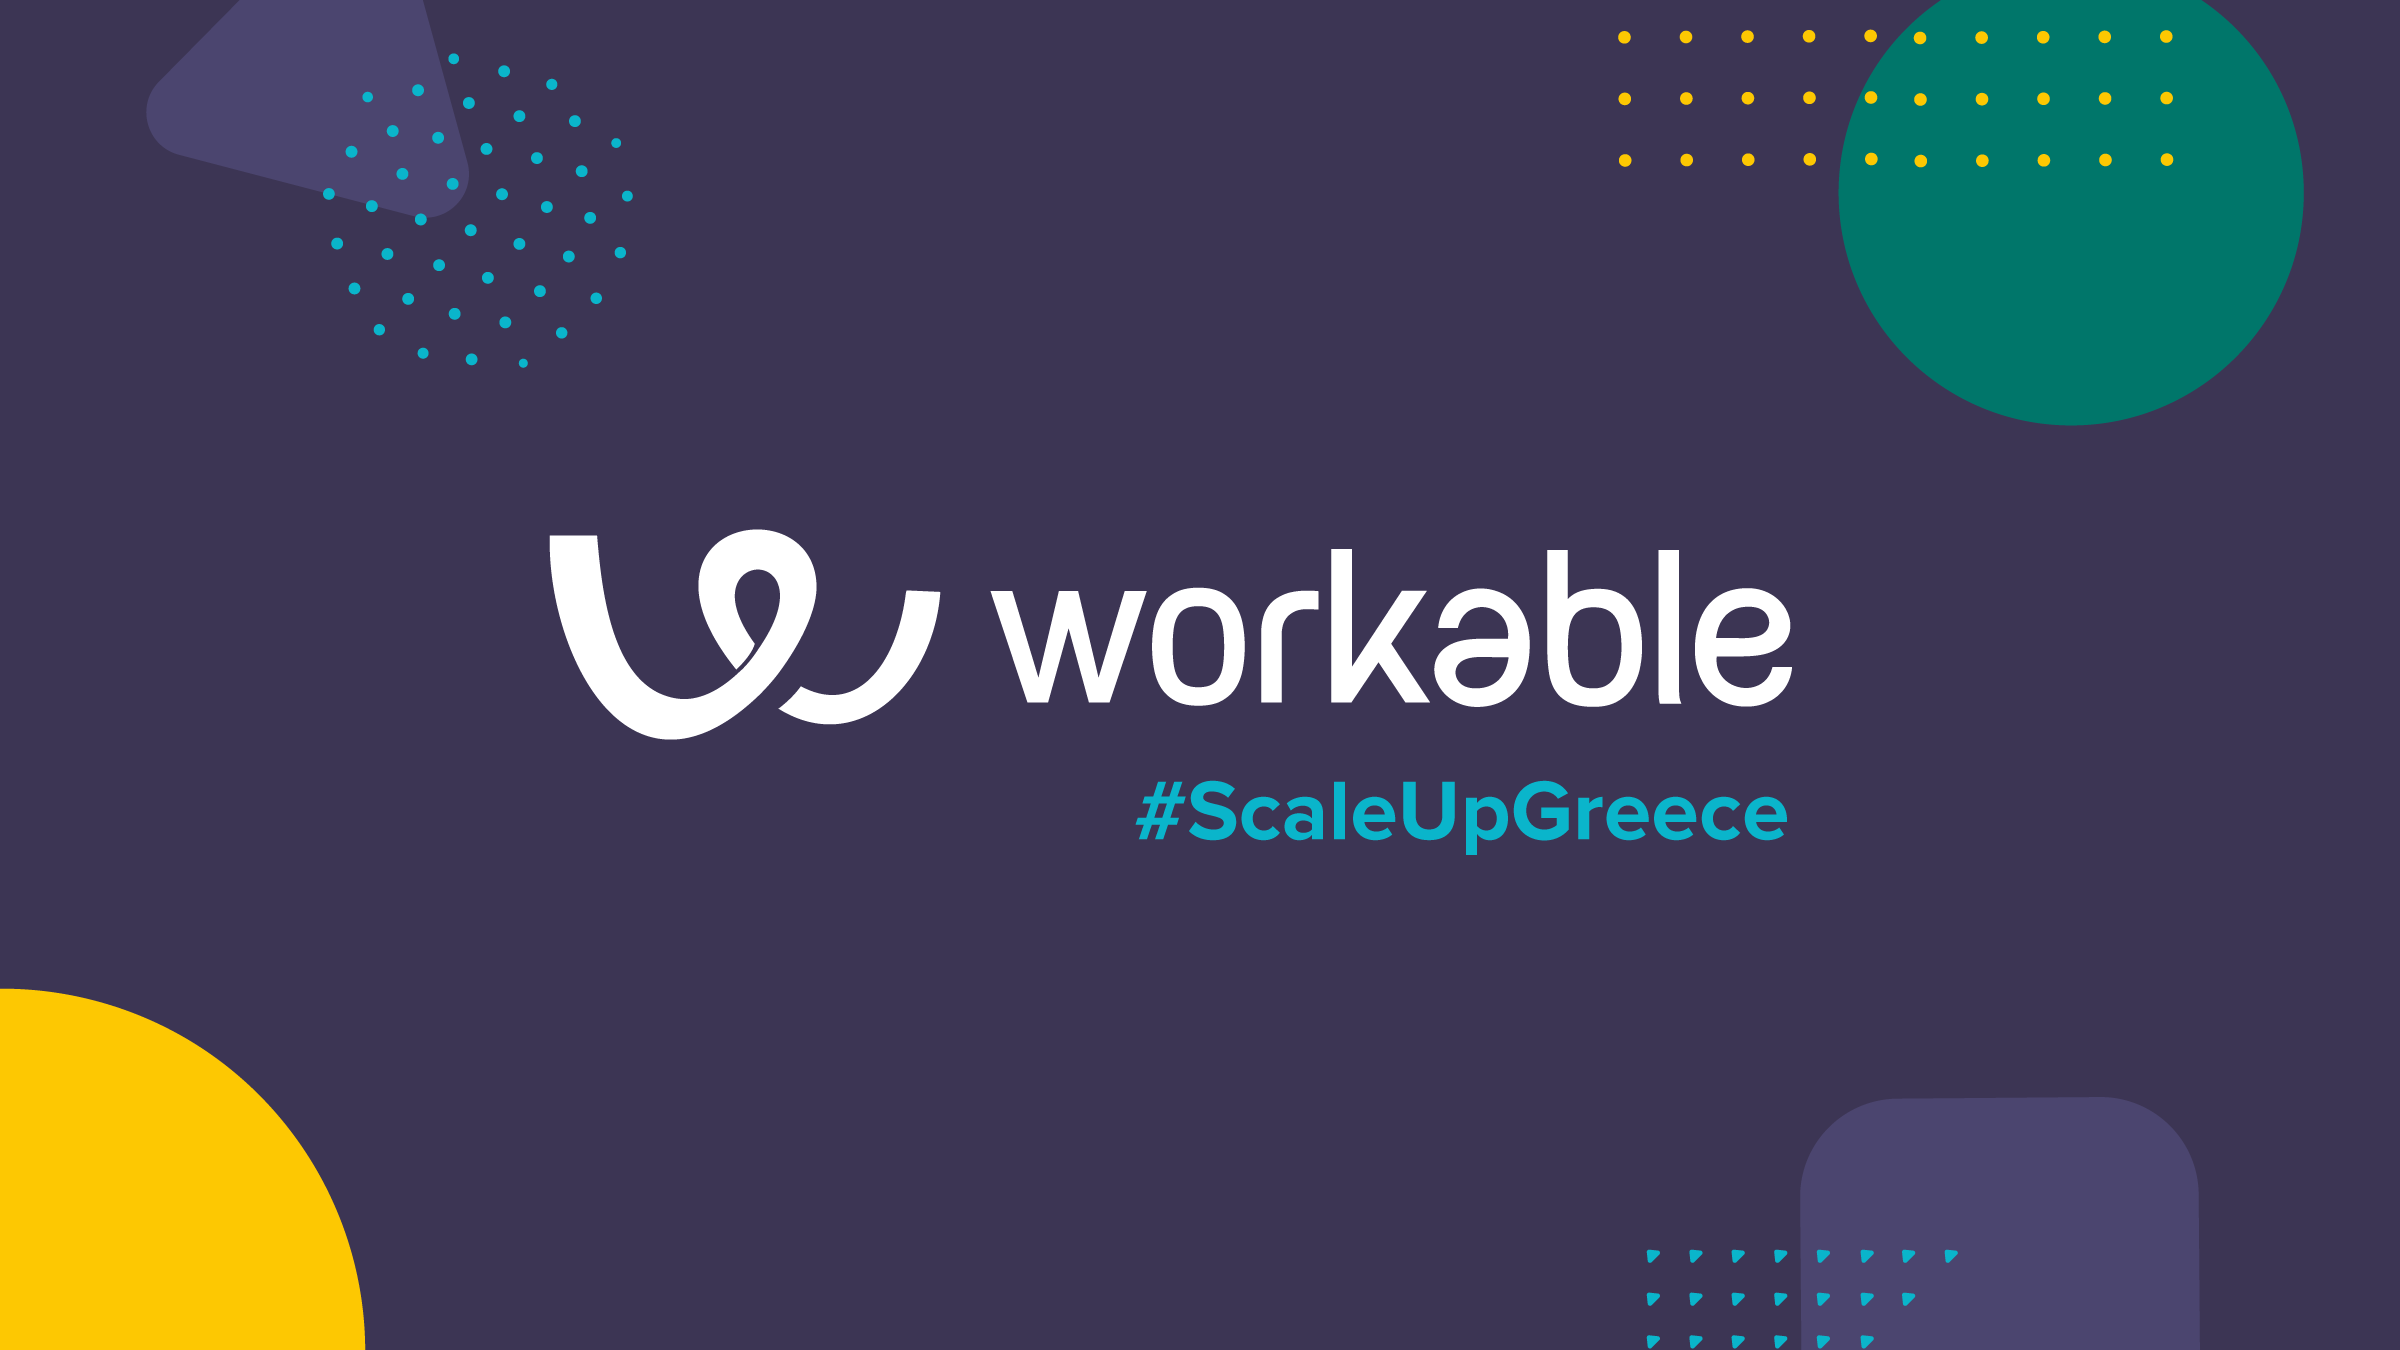 Scale Up Greece #3 with Workable is loading…